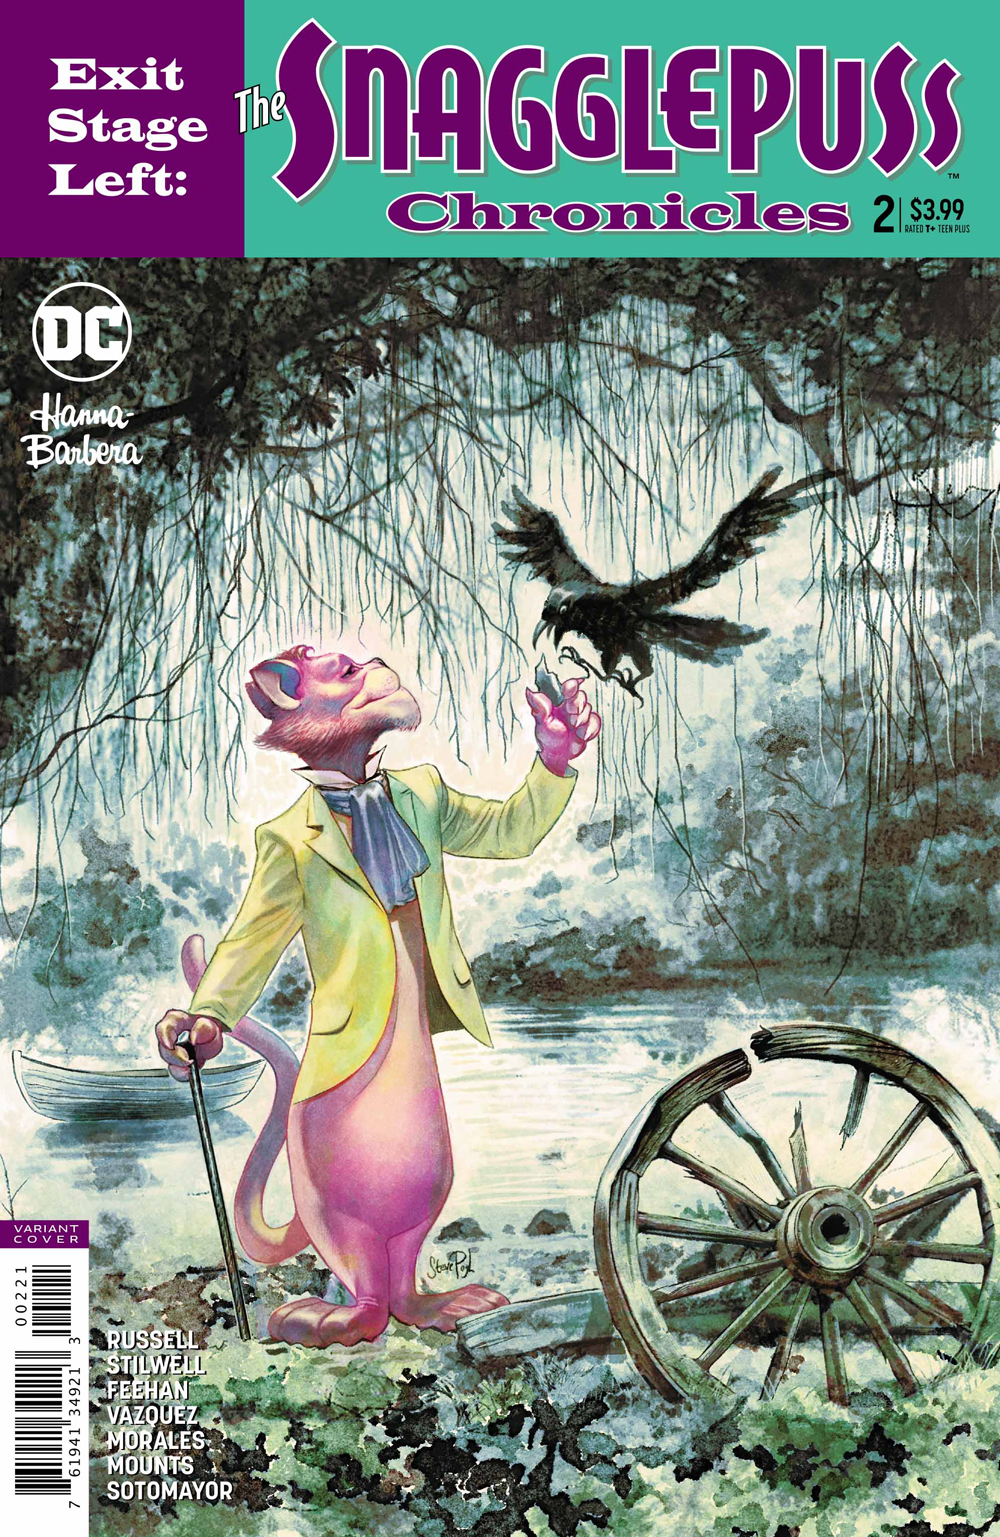 EXIT STAGE LEFT THE SNAGGLEPUSS CHRONICLES #2 (OF 6) VAR ED